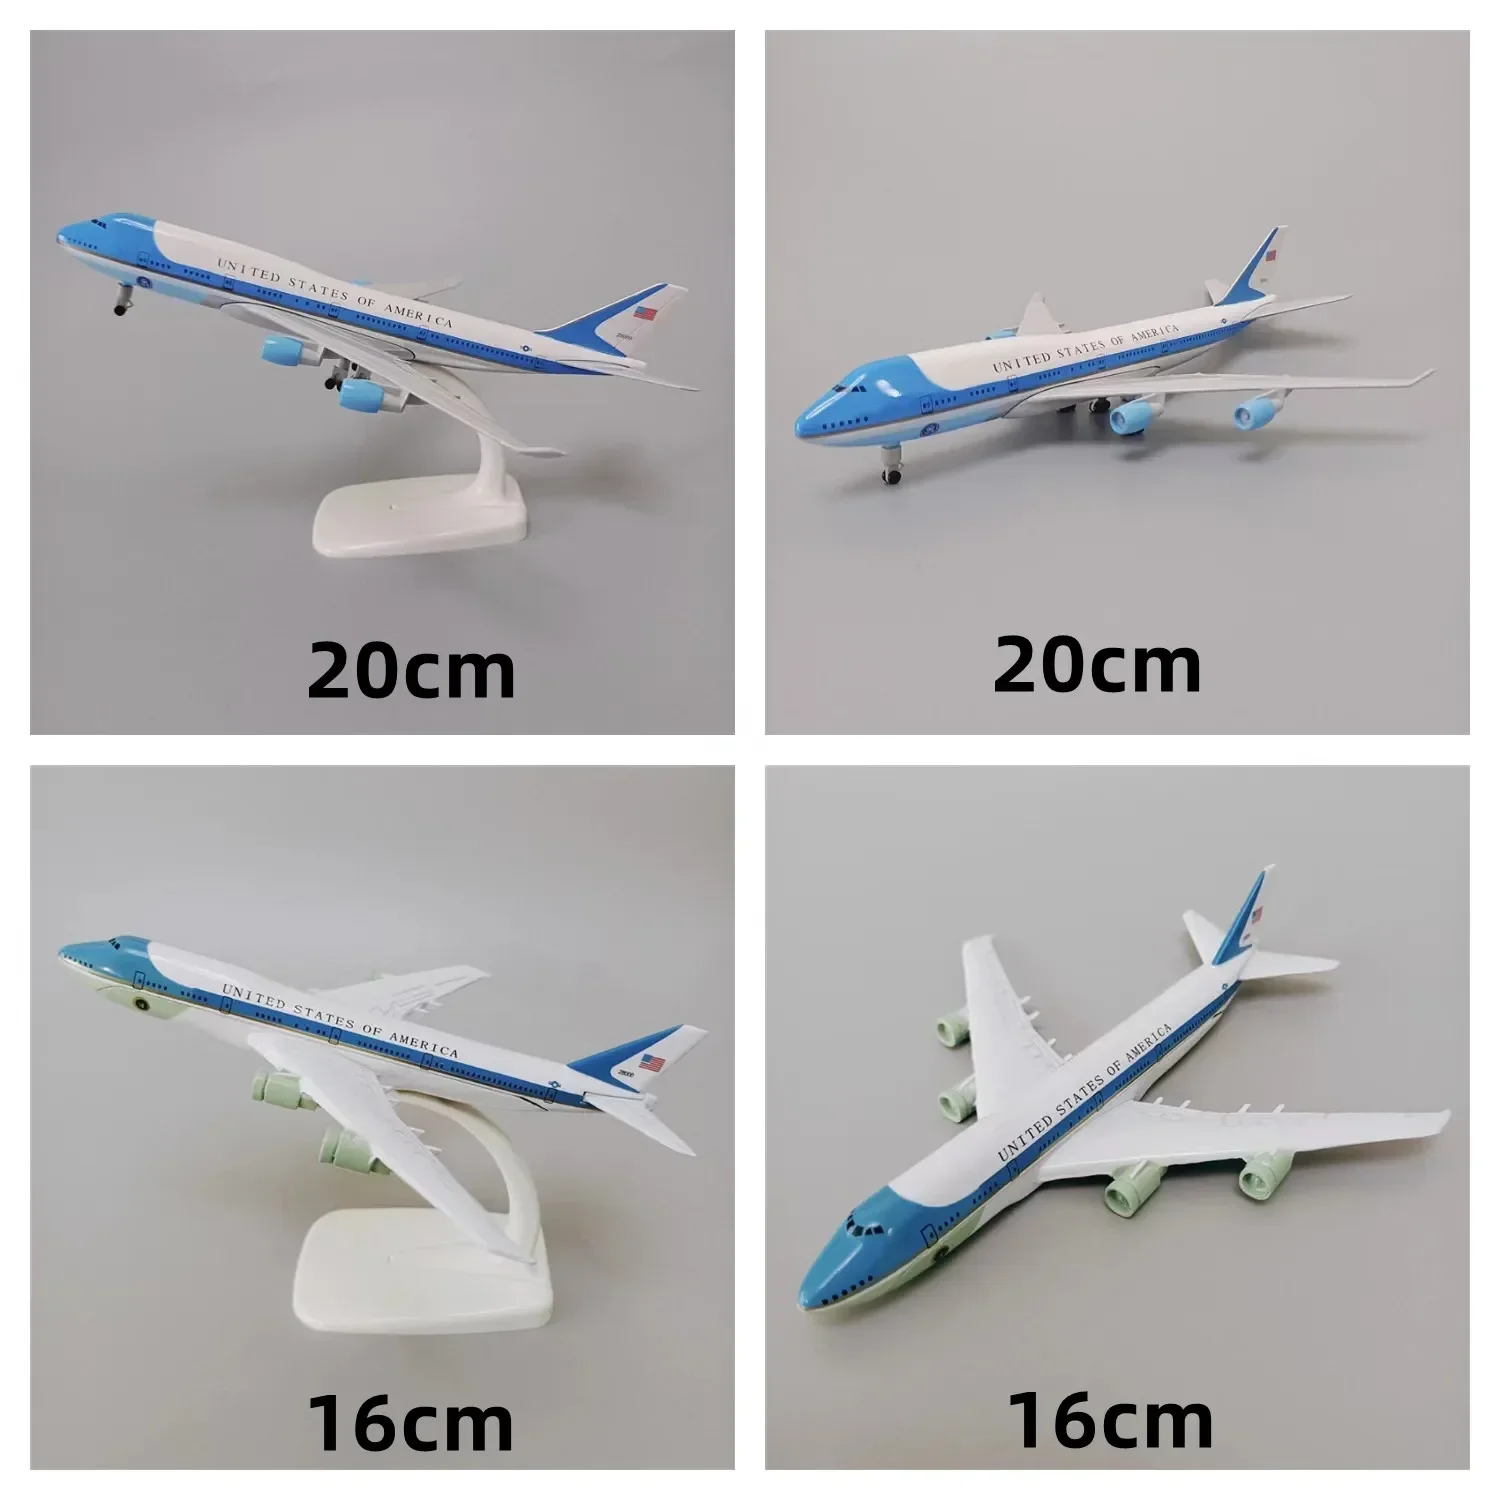 

USA Air Force One B747 Airlines Boeing 747 Airways Diecast Airplane Model Plane Model Alloy Metal Aircraft w Wheels 16CM/ 20CM